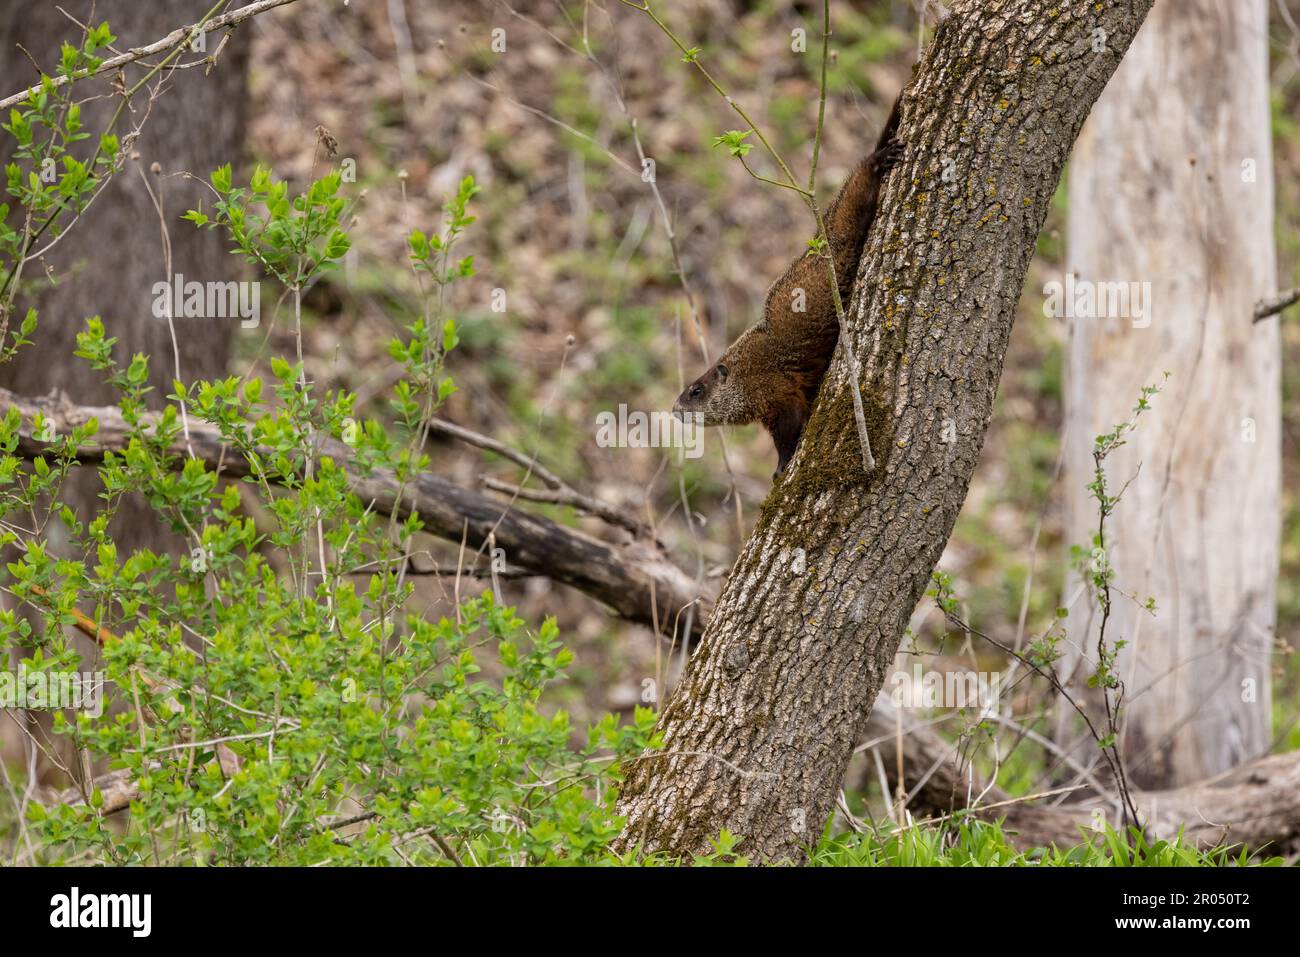 A woodchuck in a tree in the woods during spring. Stock Photo